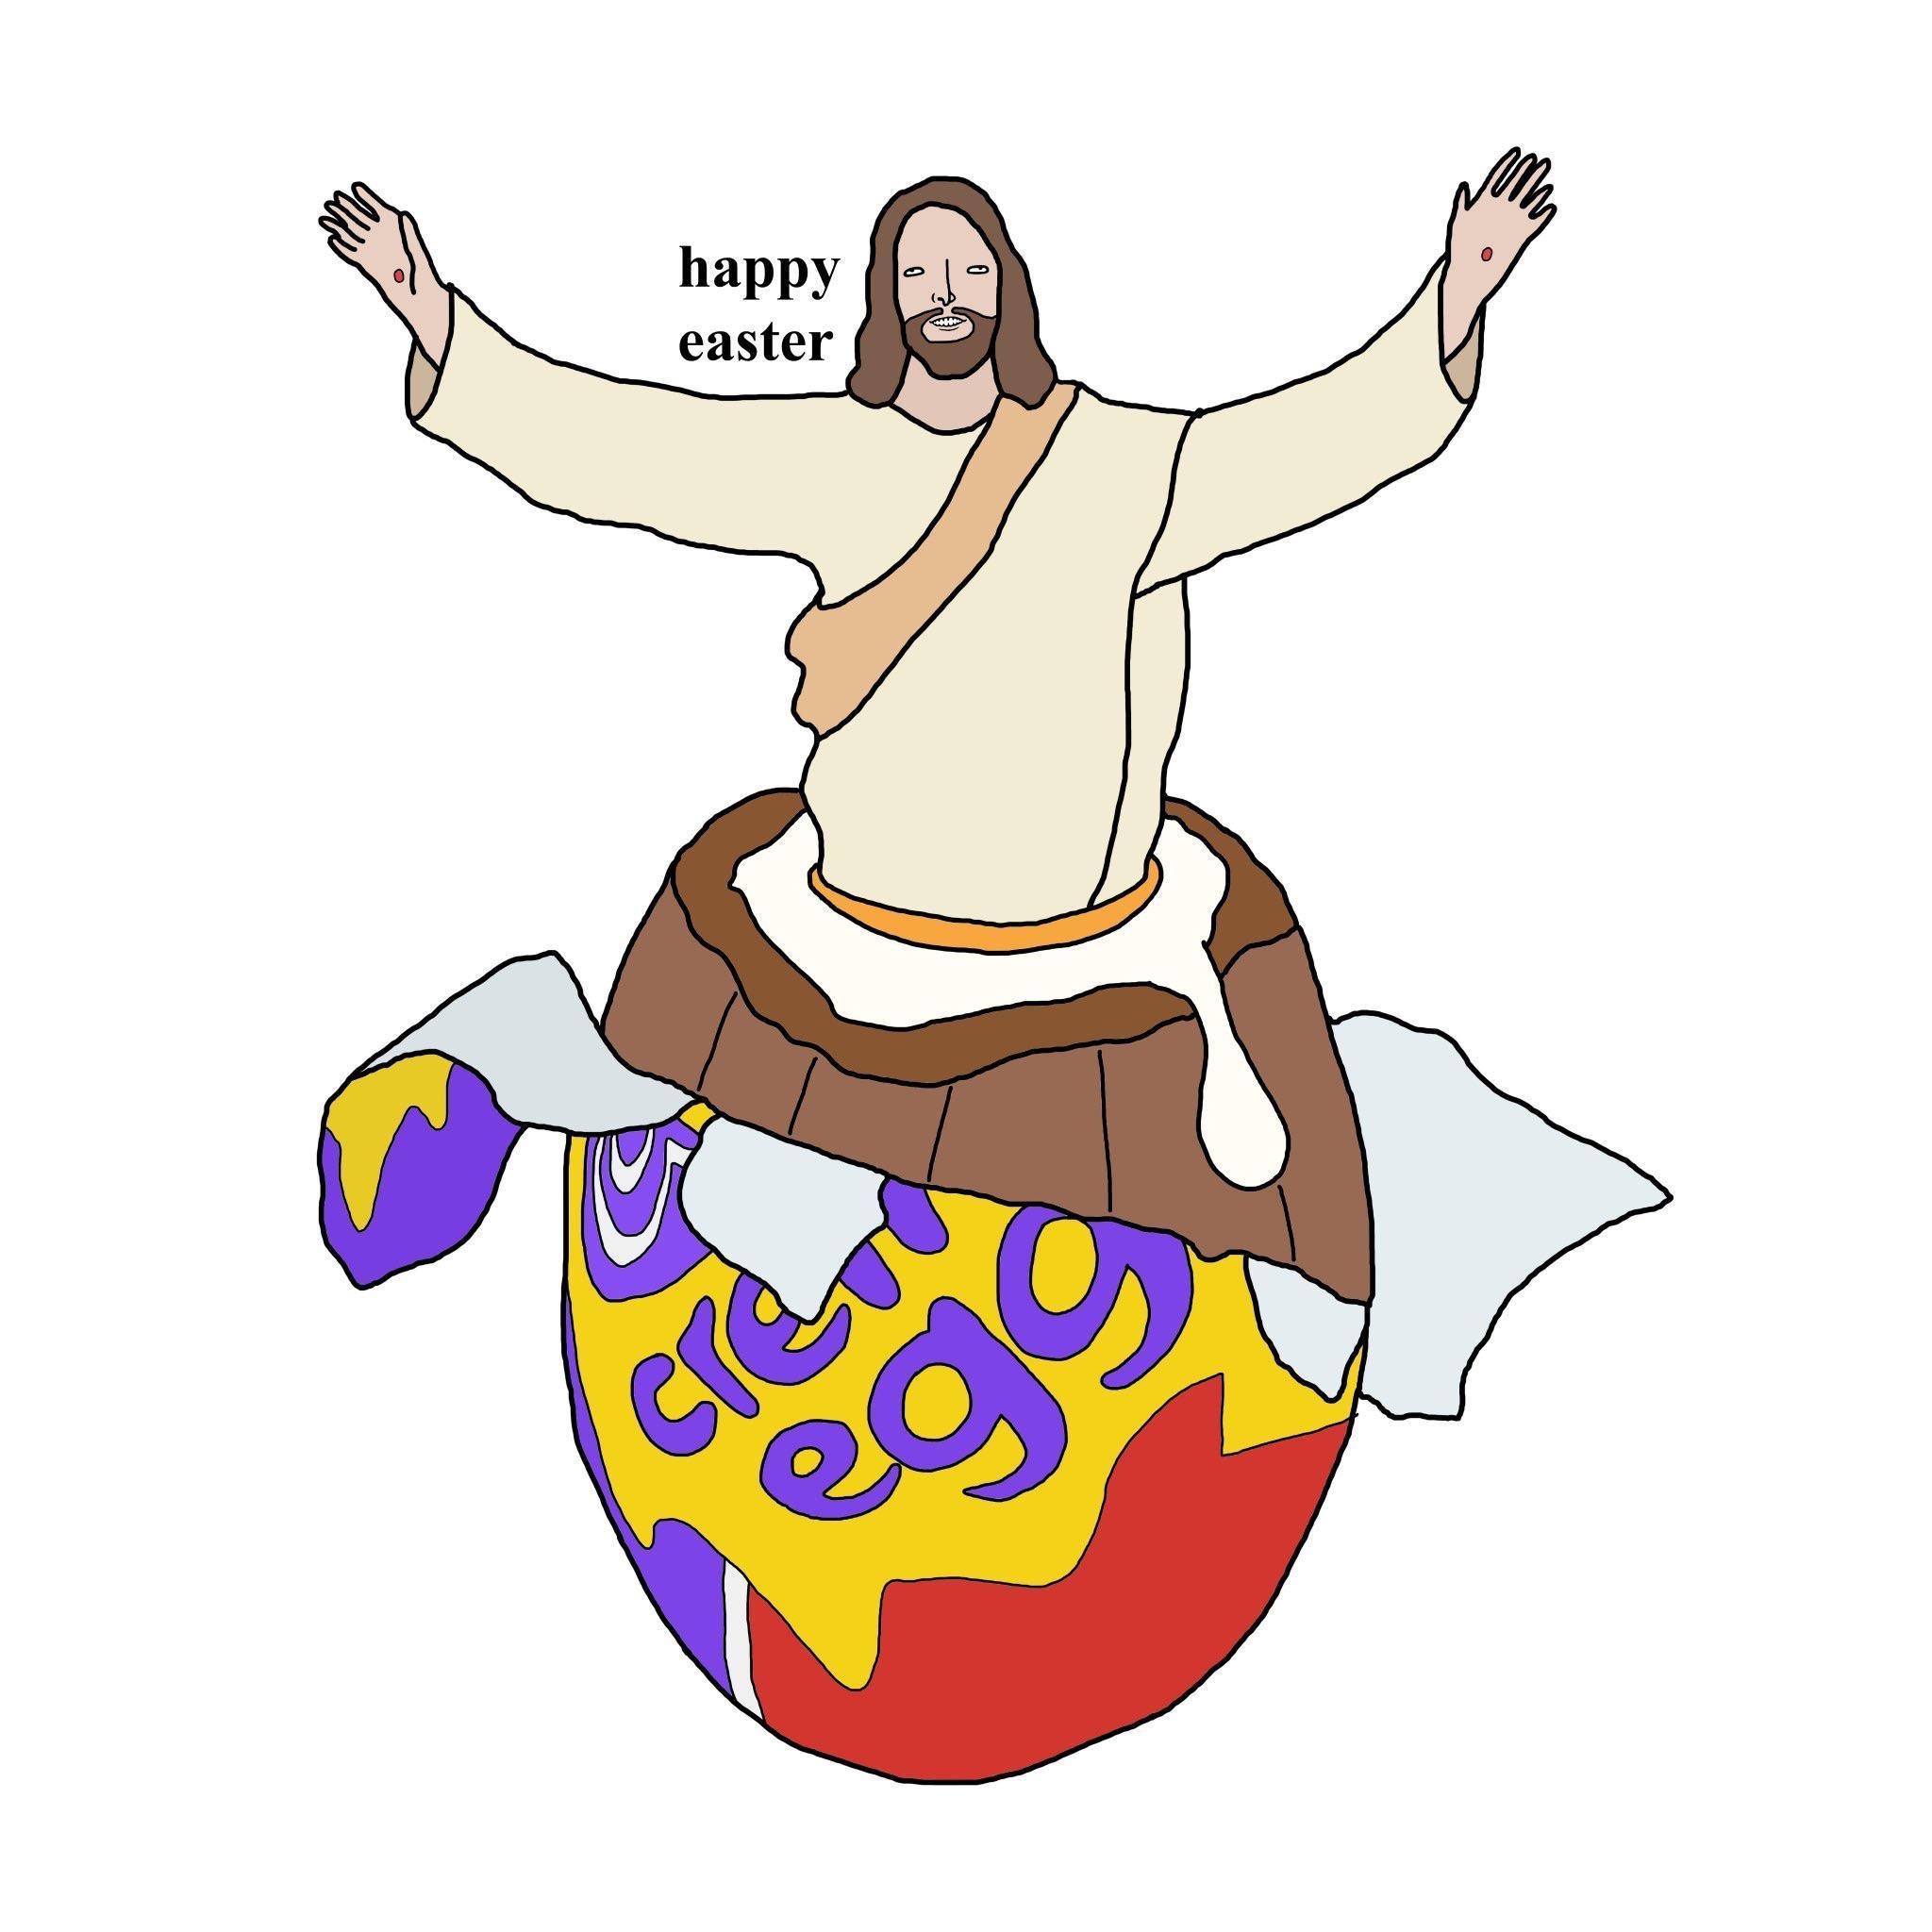 It is Easter